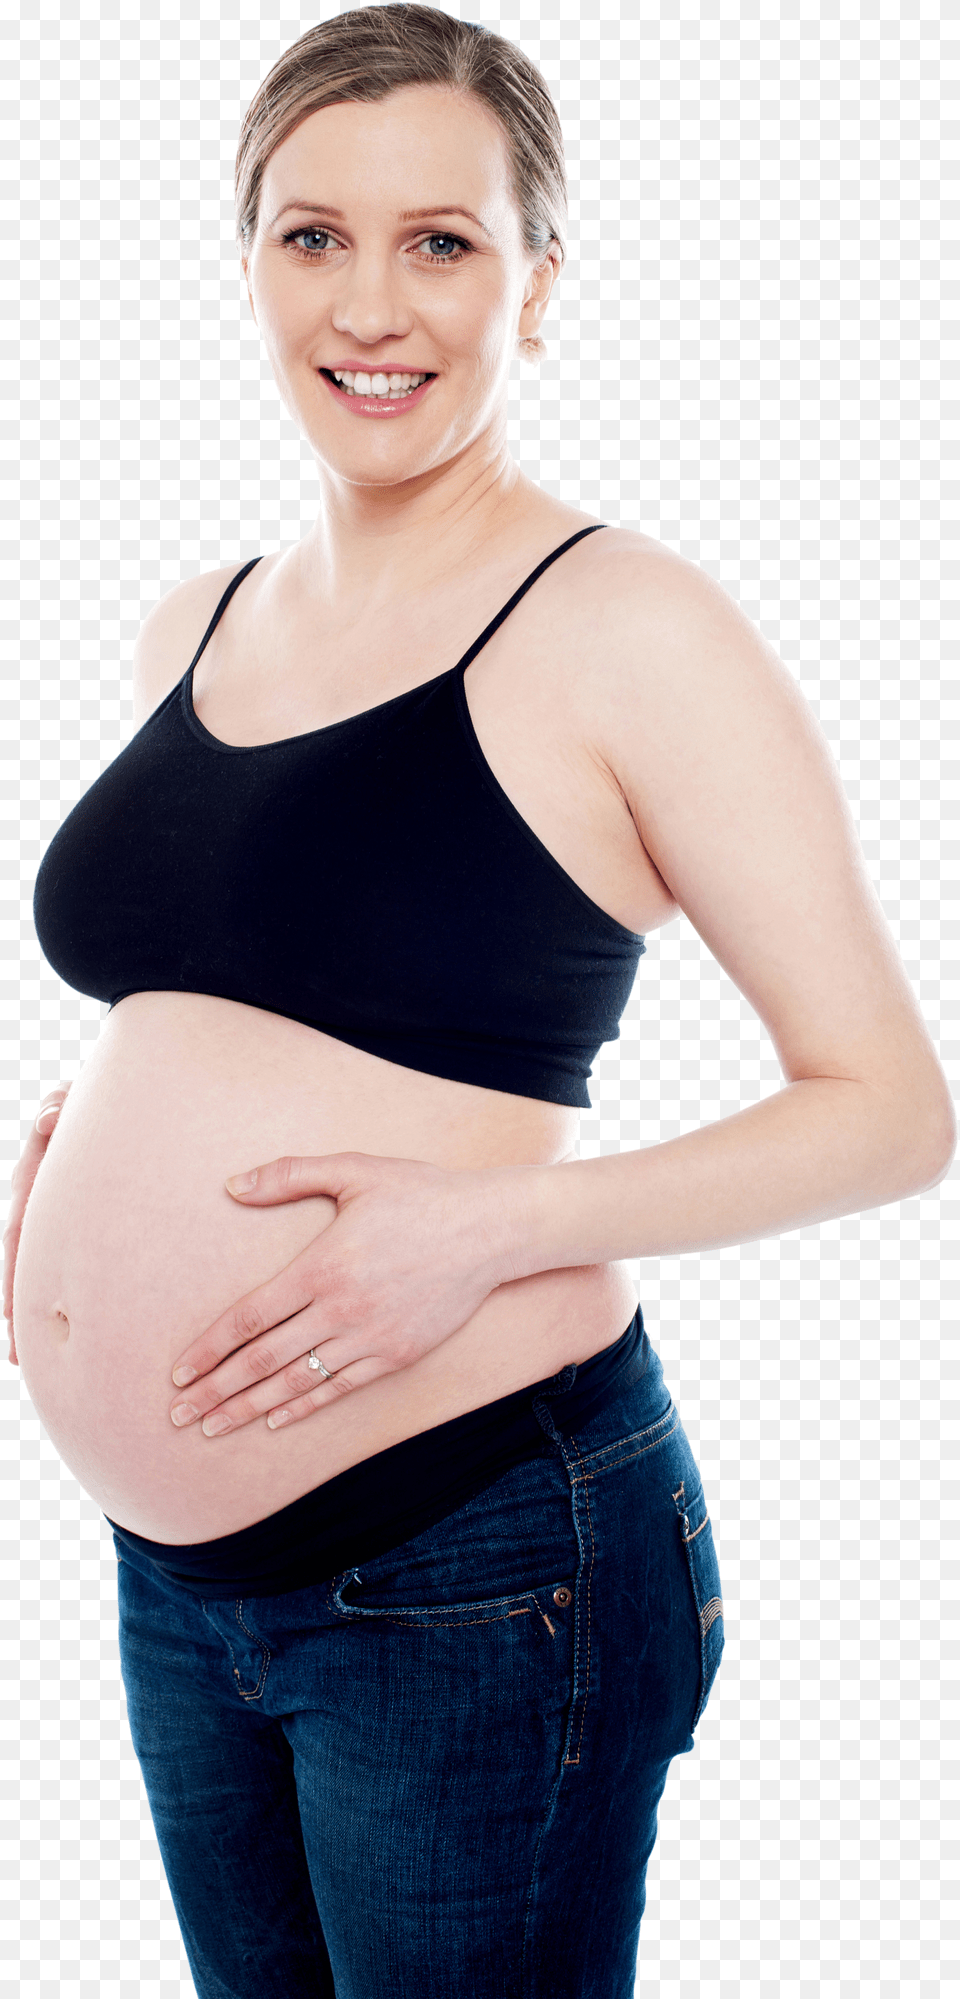 Pregnant Woman Exercise Big Belly Skinny Legs Woman Png Image